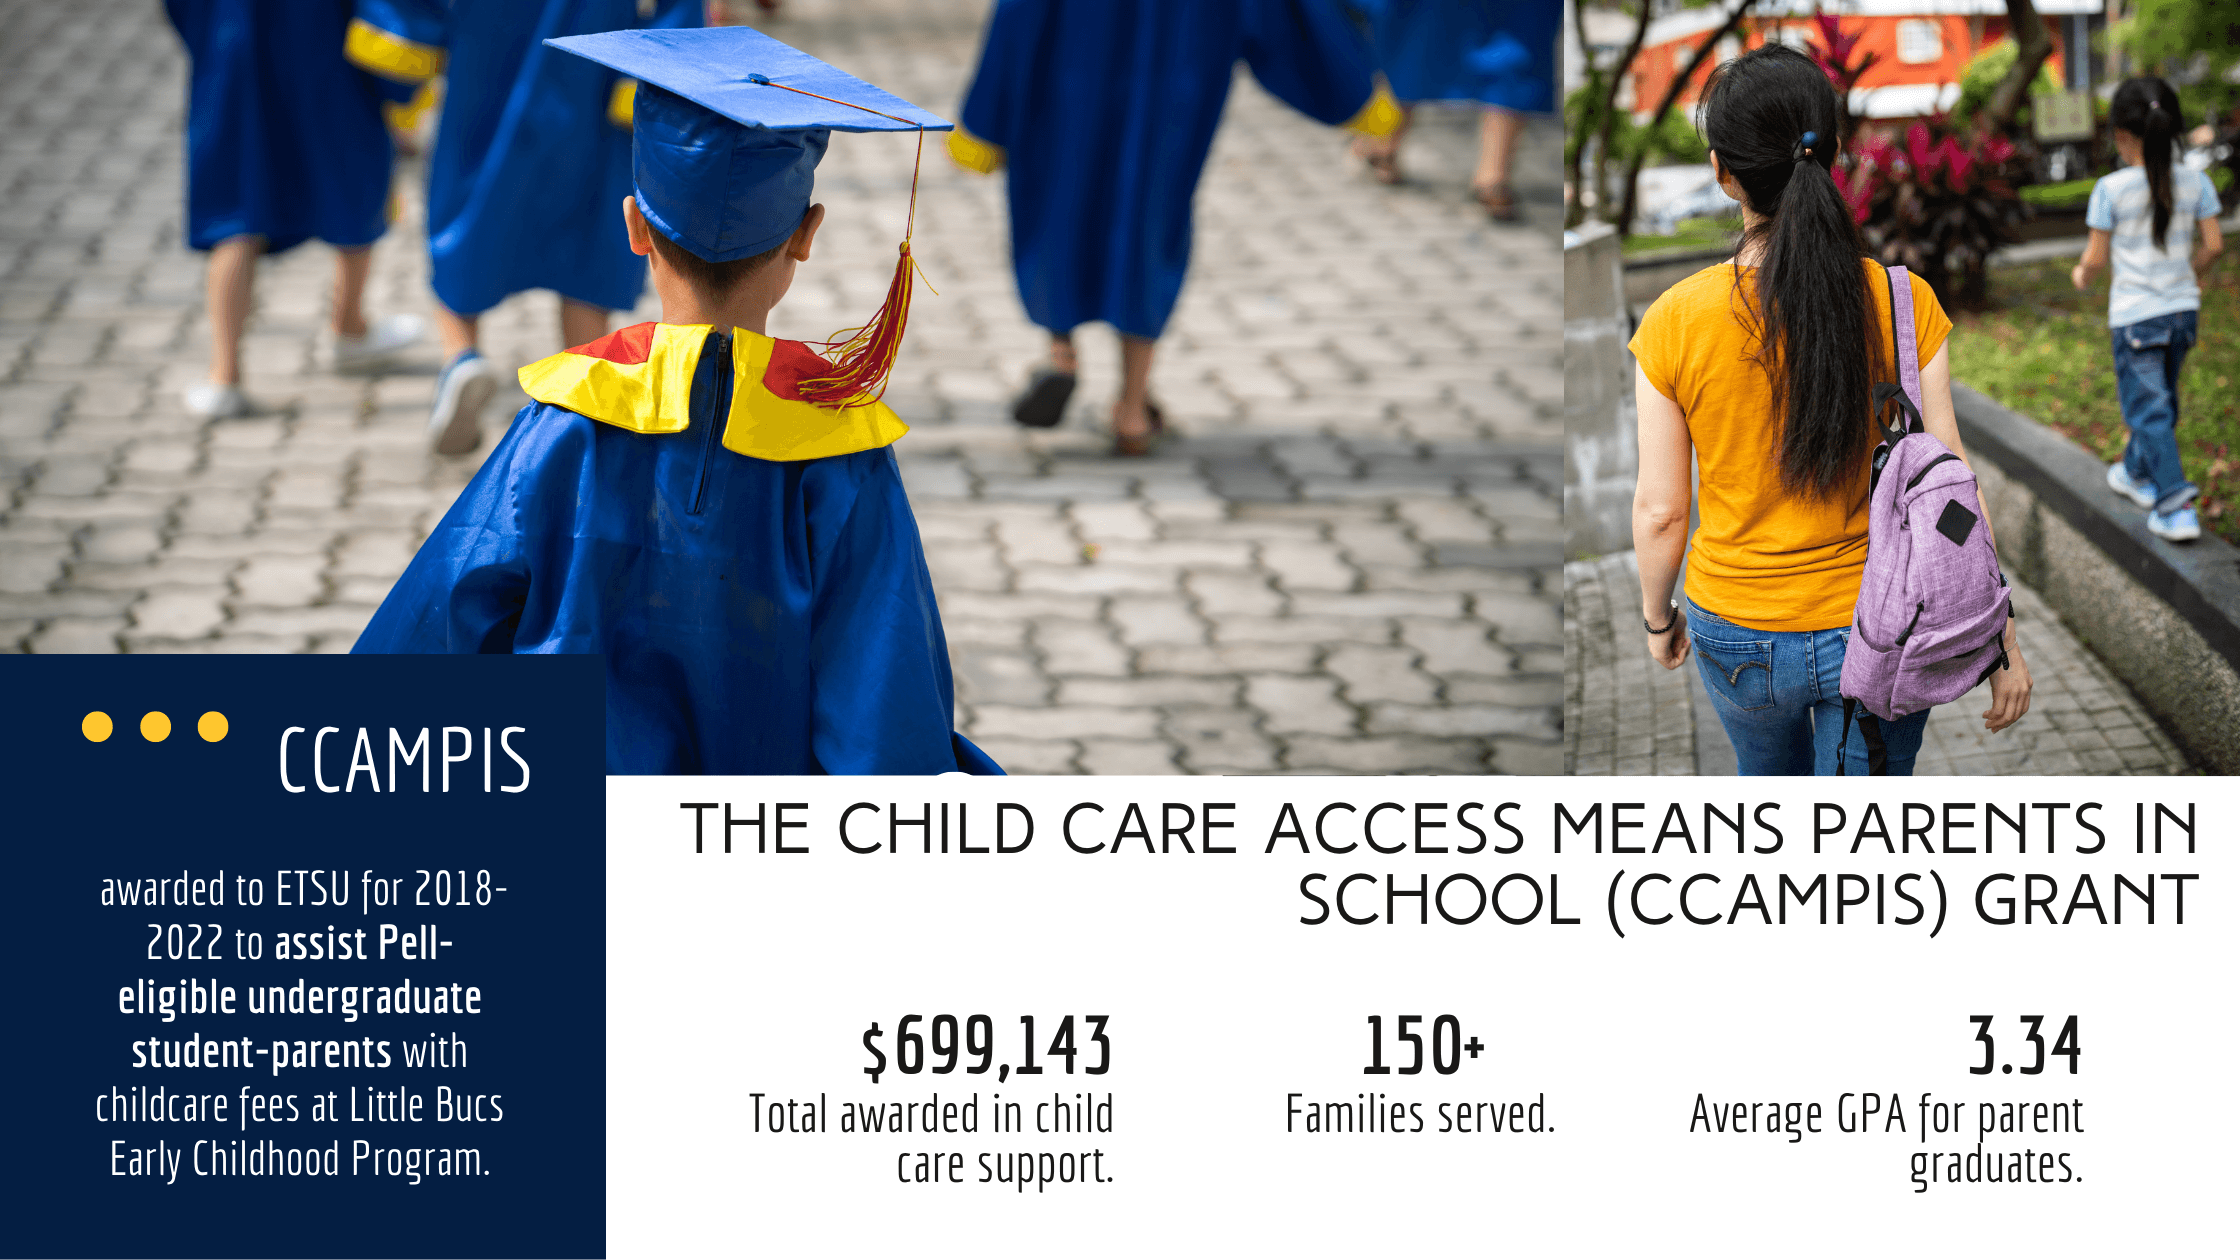 The Child Care Access Means parents in School (CCAMPIS) grant. ETSU has awarded $699,143 in child care support. Served more than 150 families. And student-parents that participate in CCAMPIS have an average GPA of 3.34